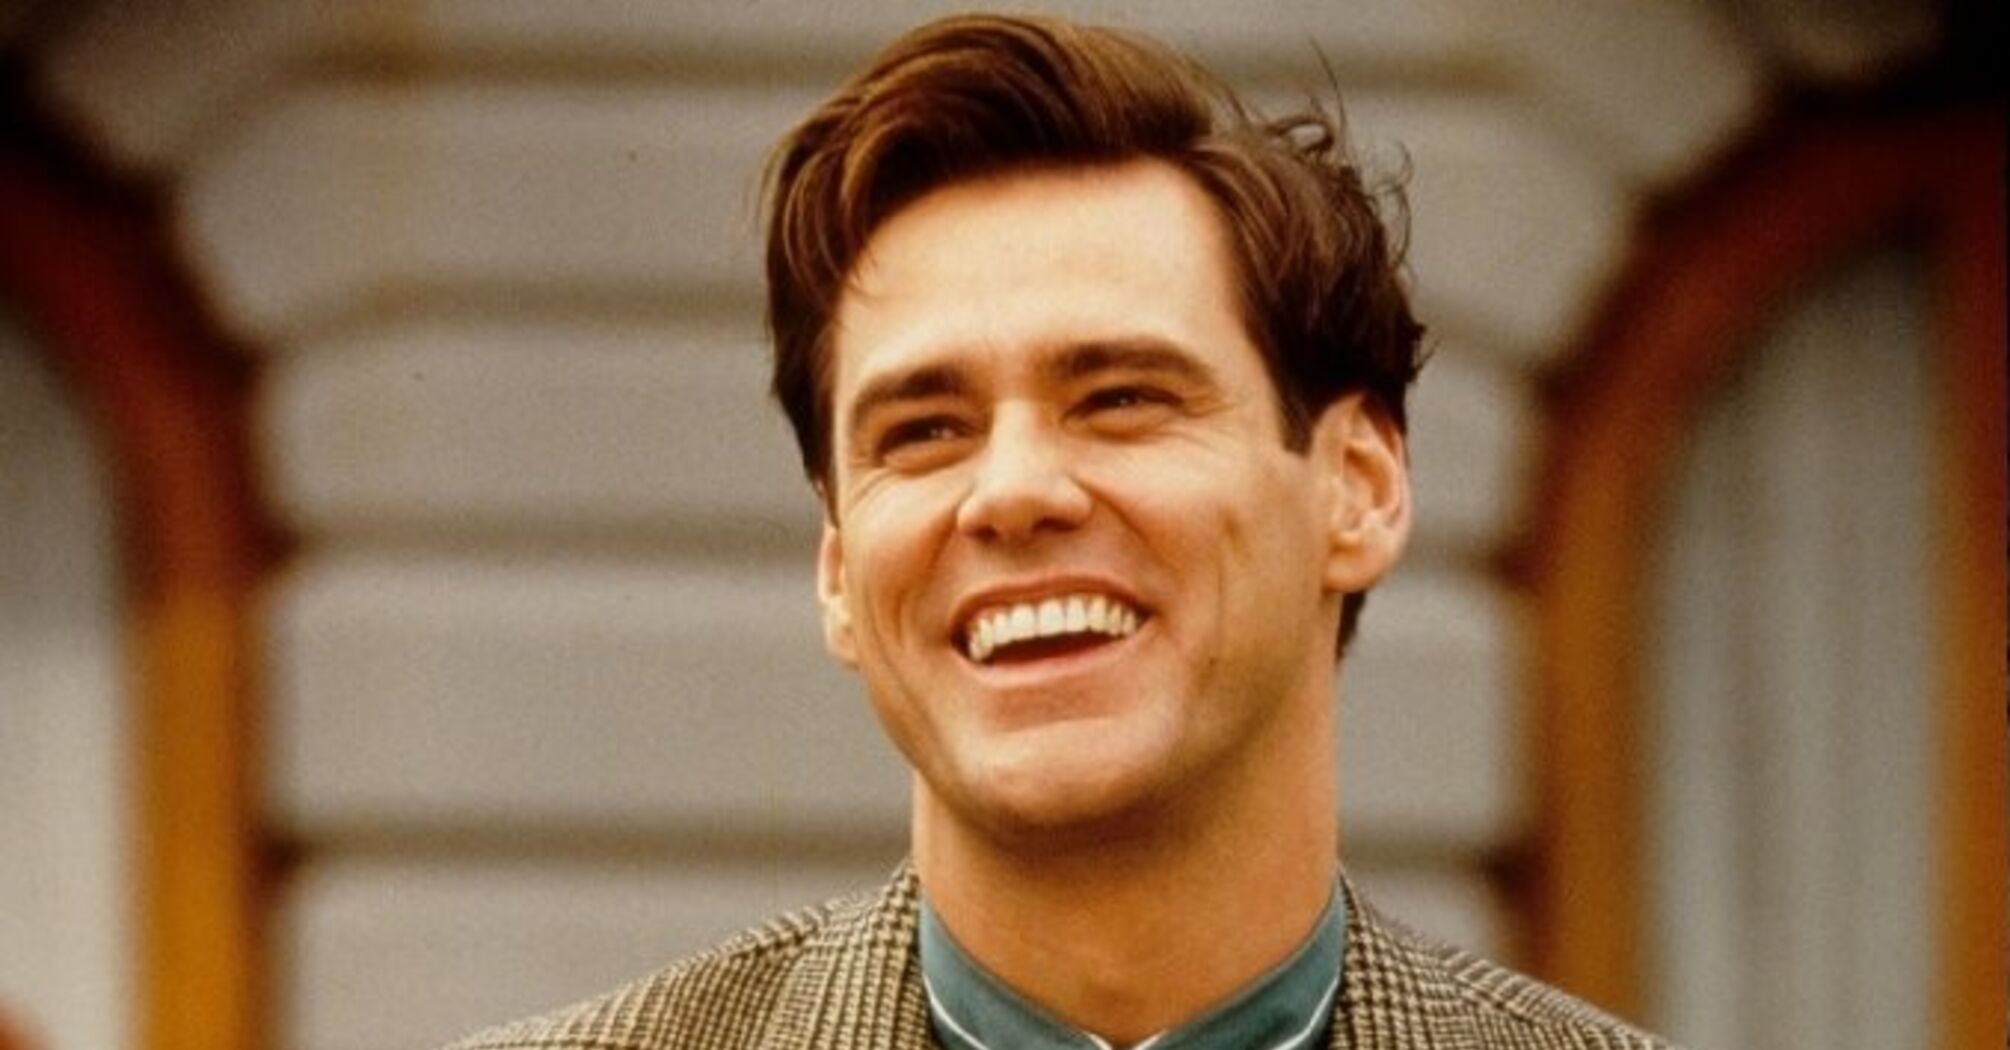 5 interesting facts about Jim Carrey